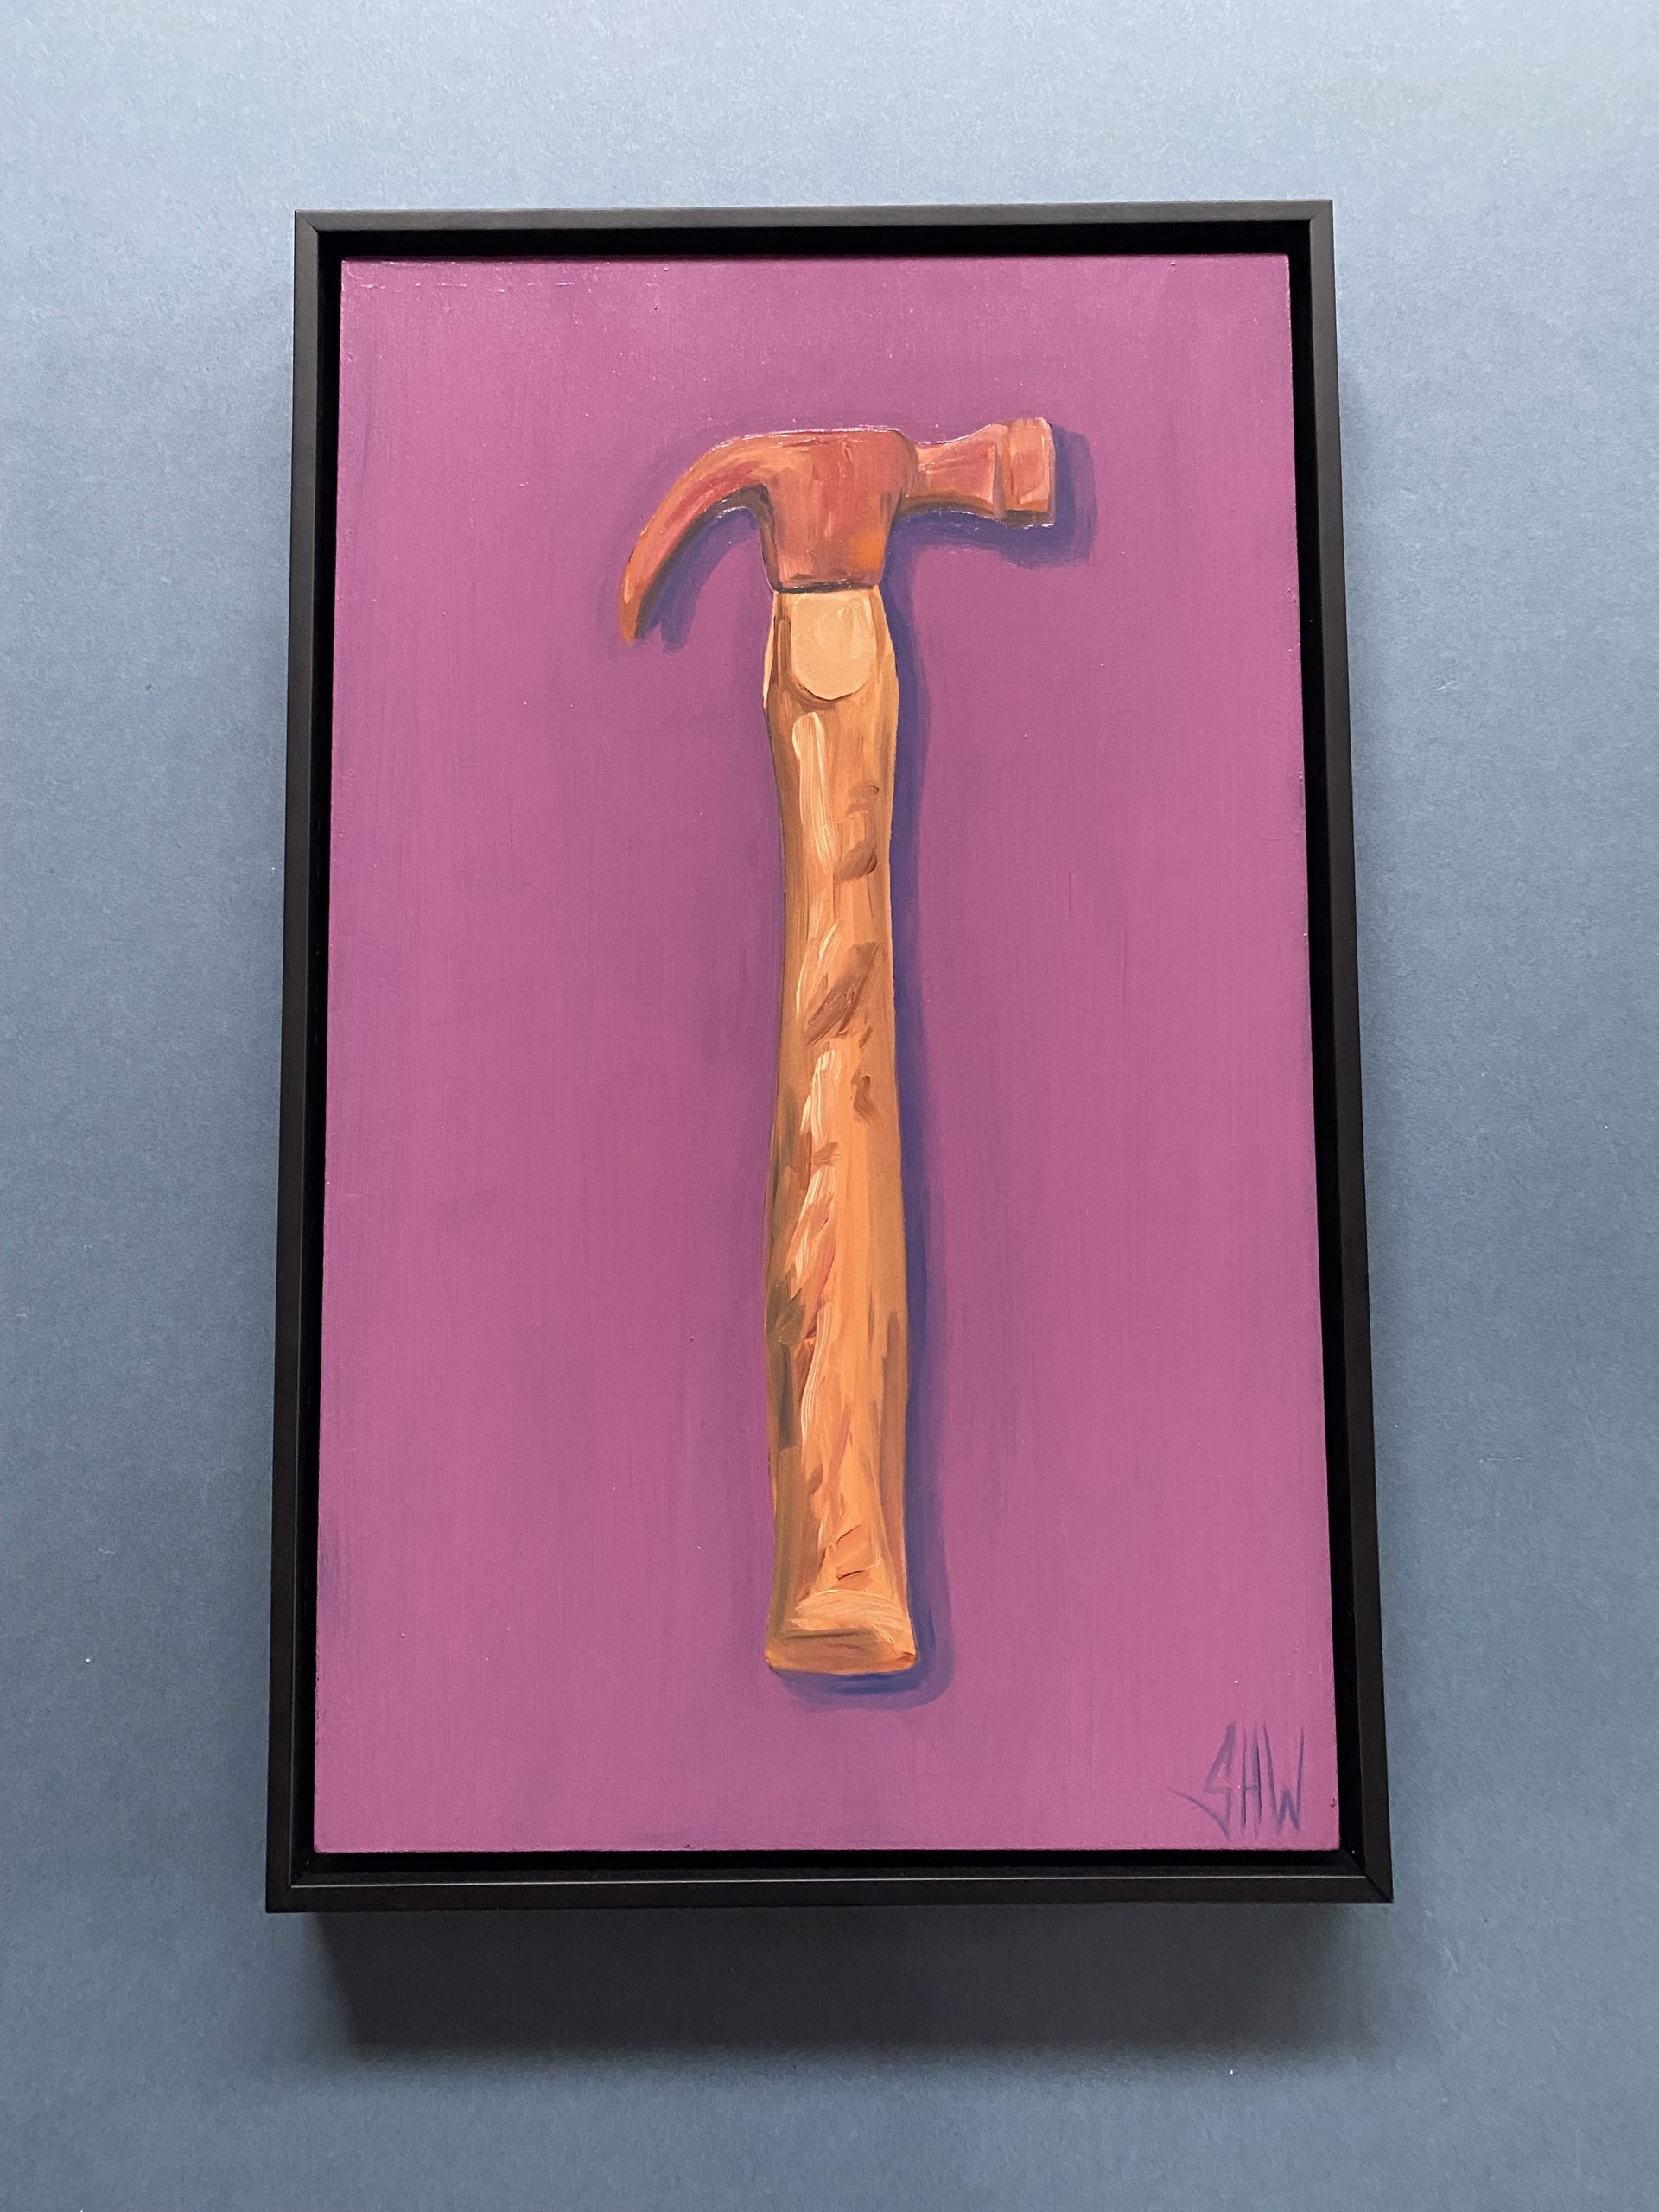 Tool No. 15 (Claw Hammer) by Stephen Wells